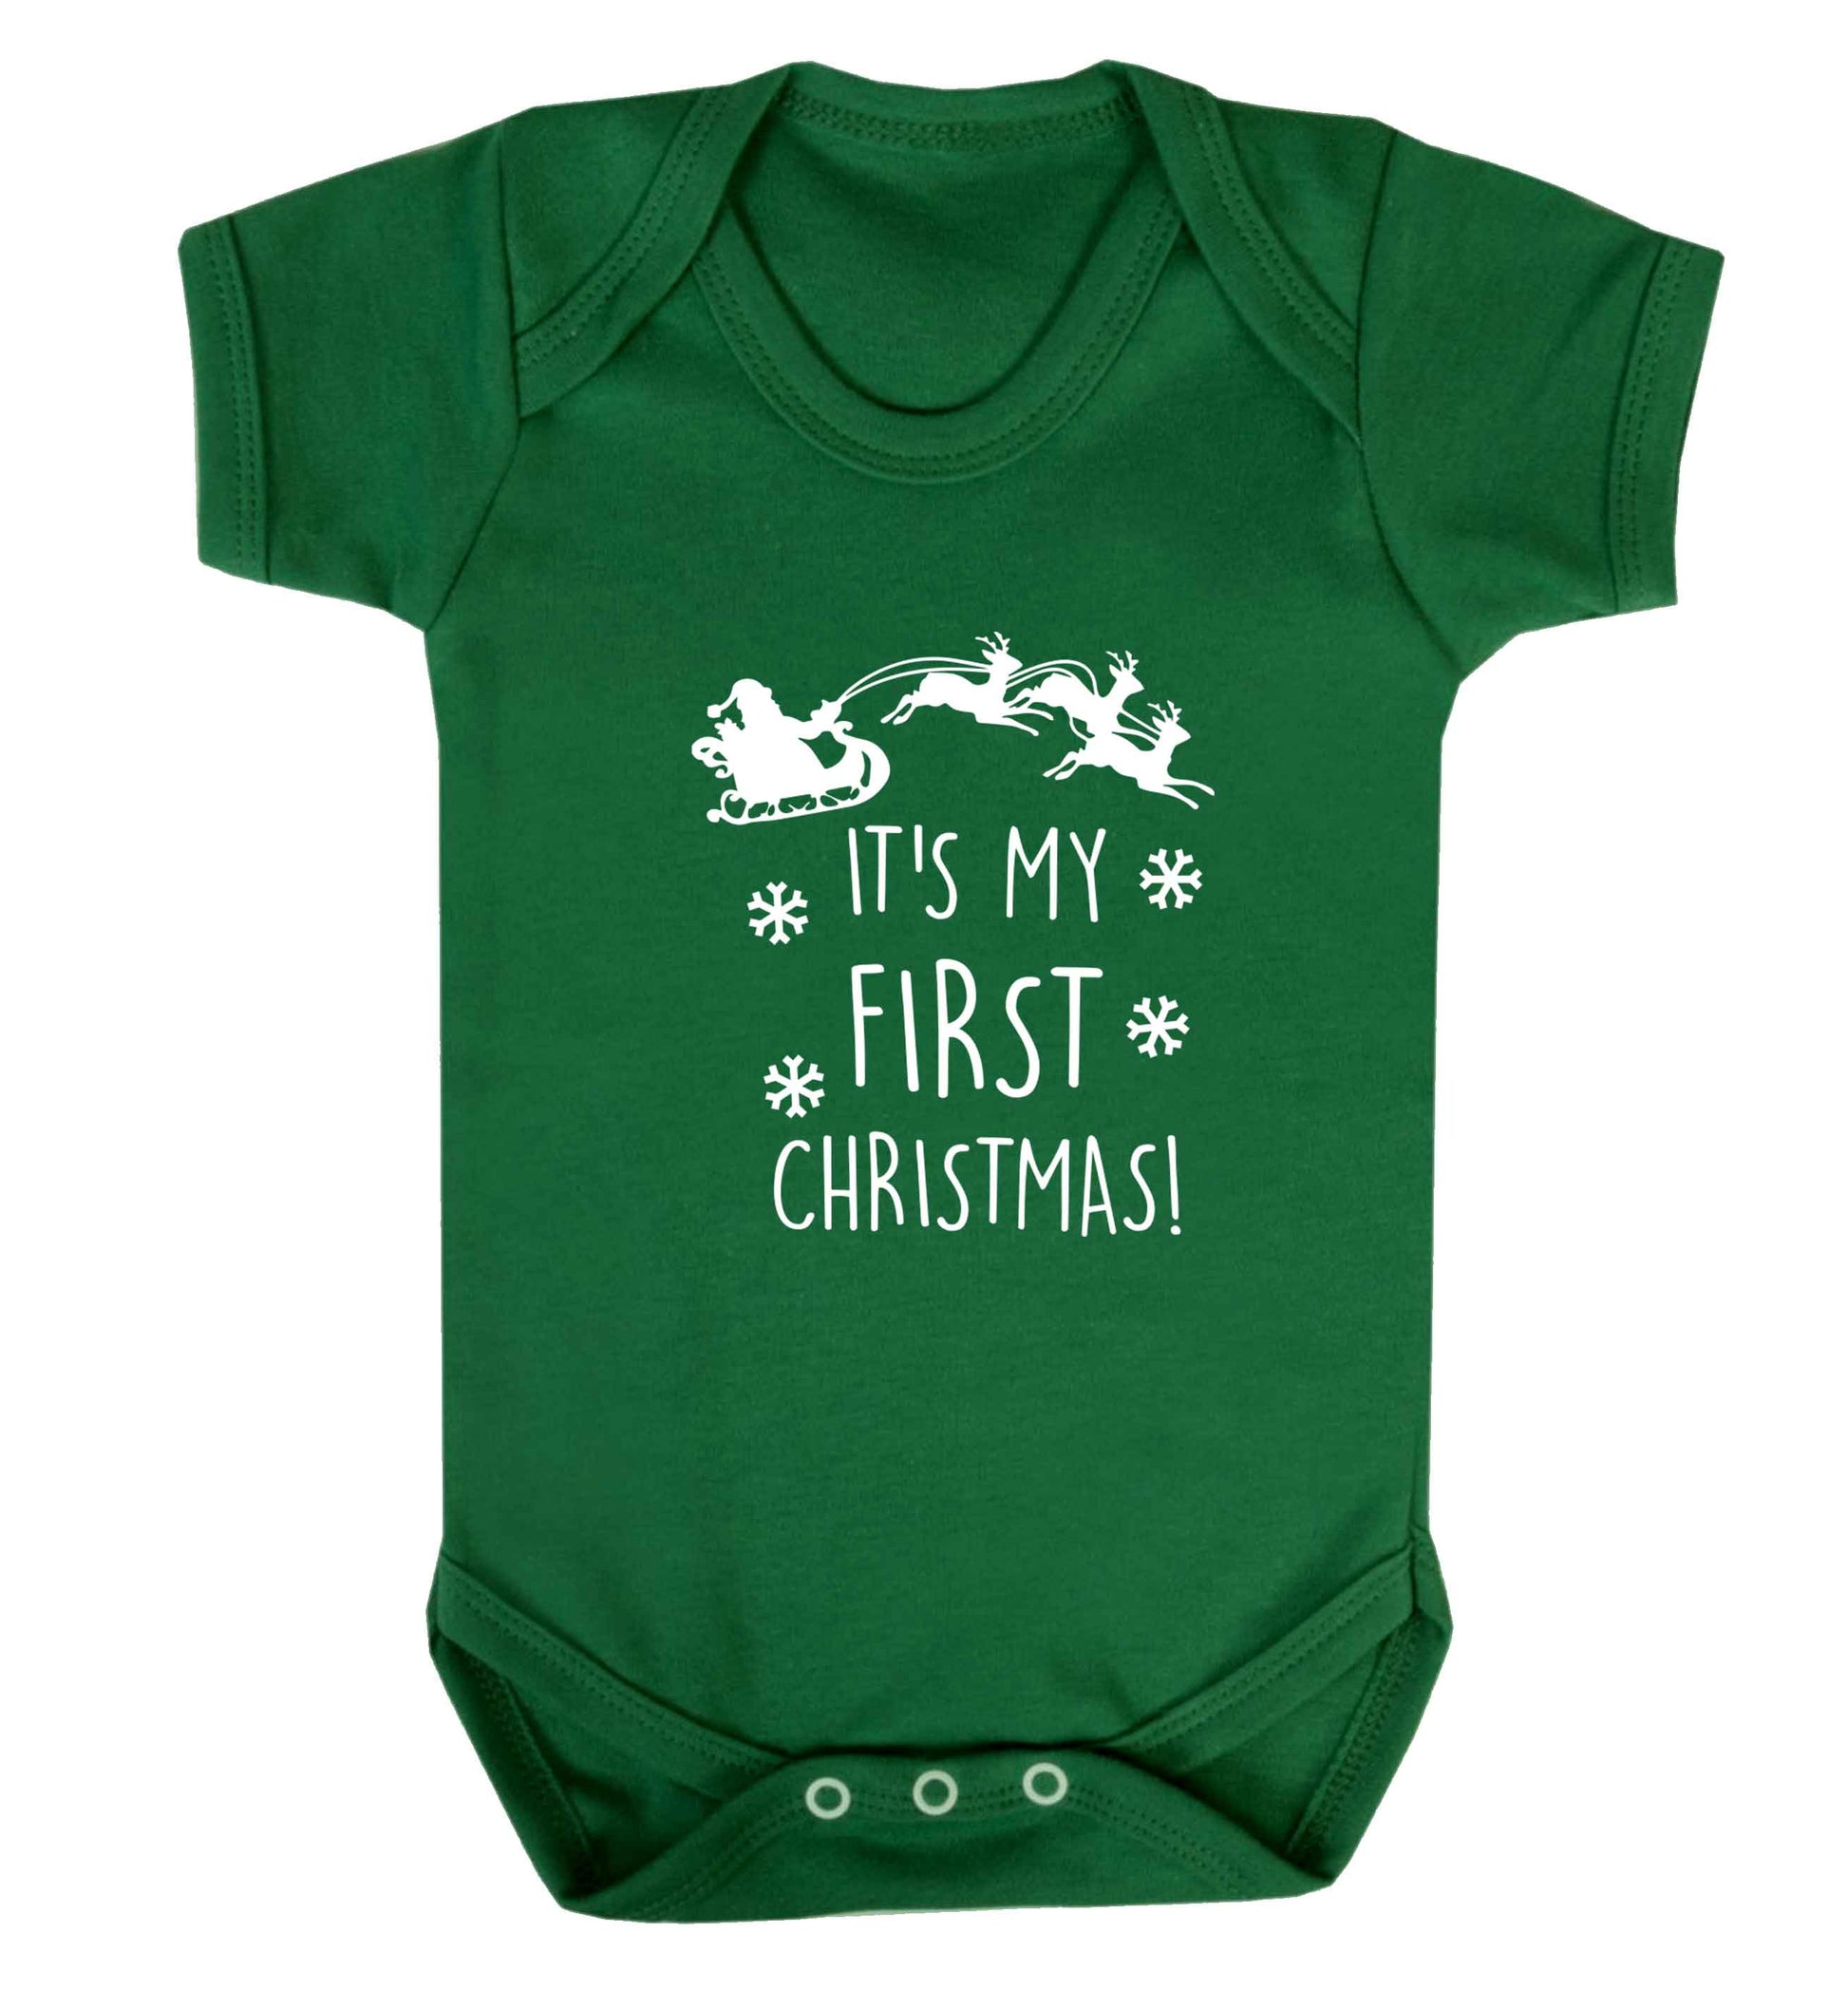 It's my first Christmas - Santa sleigh text baby vest green 18-24 months